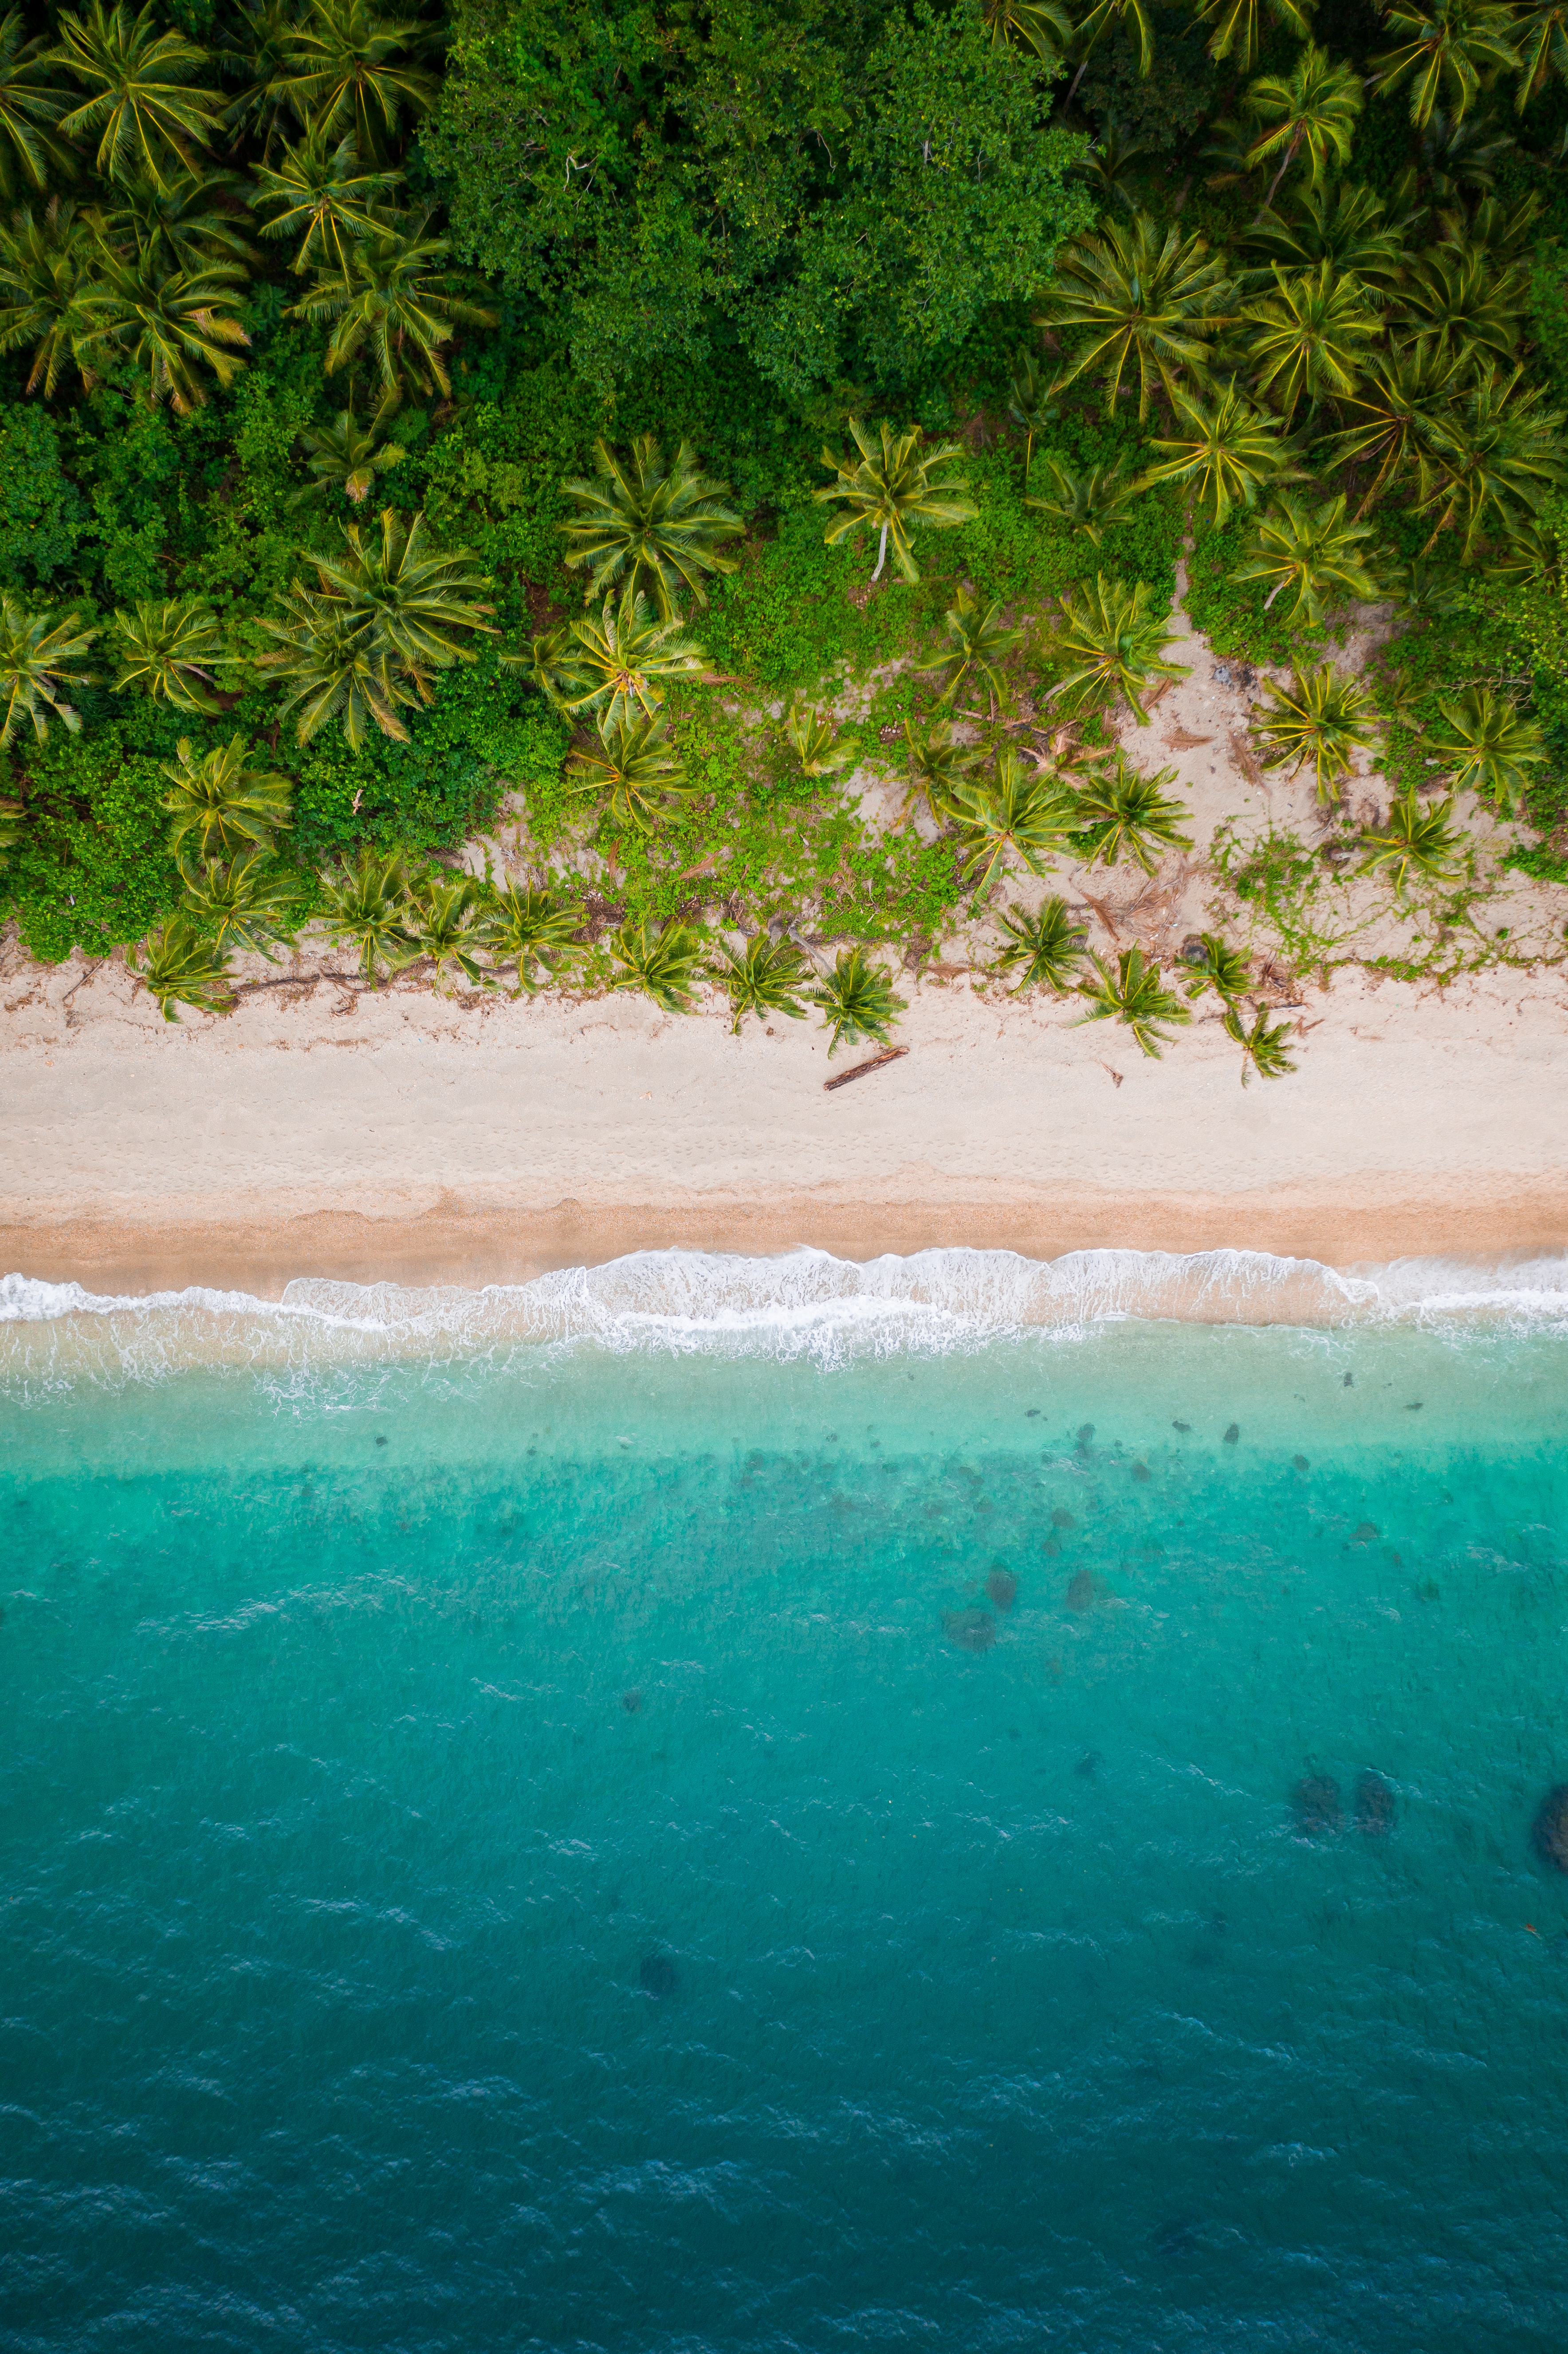 view from above, bank, nature, beach, palms, sand, shore